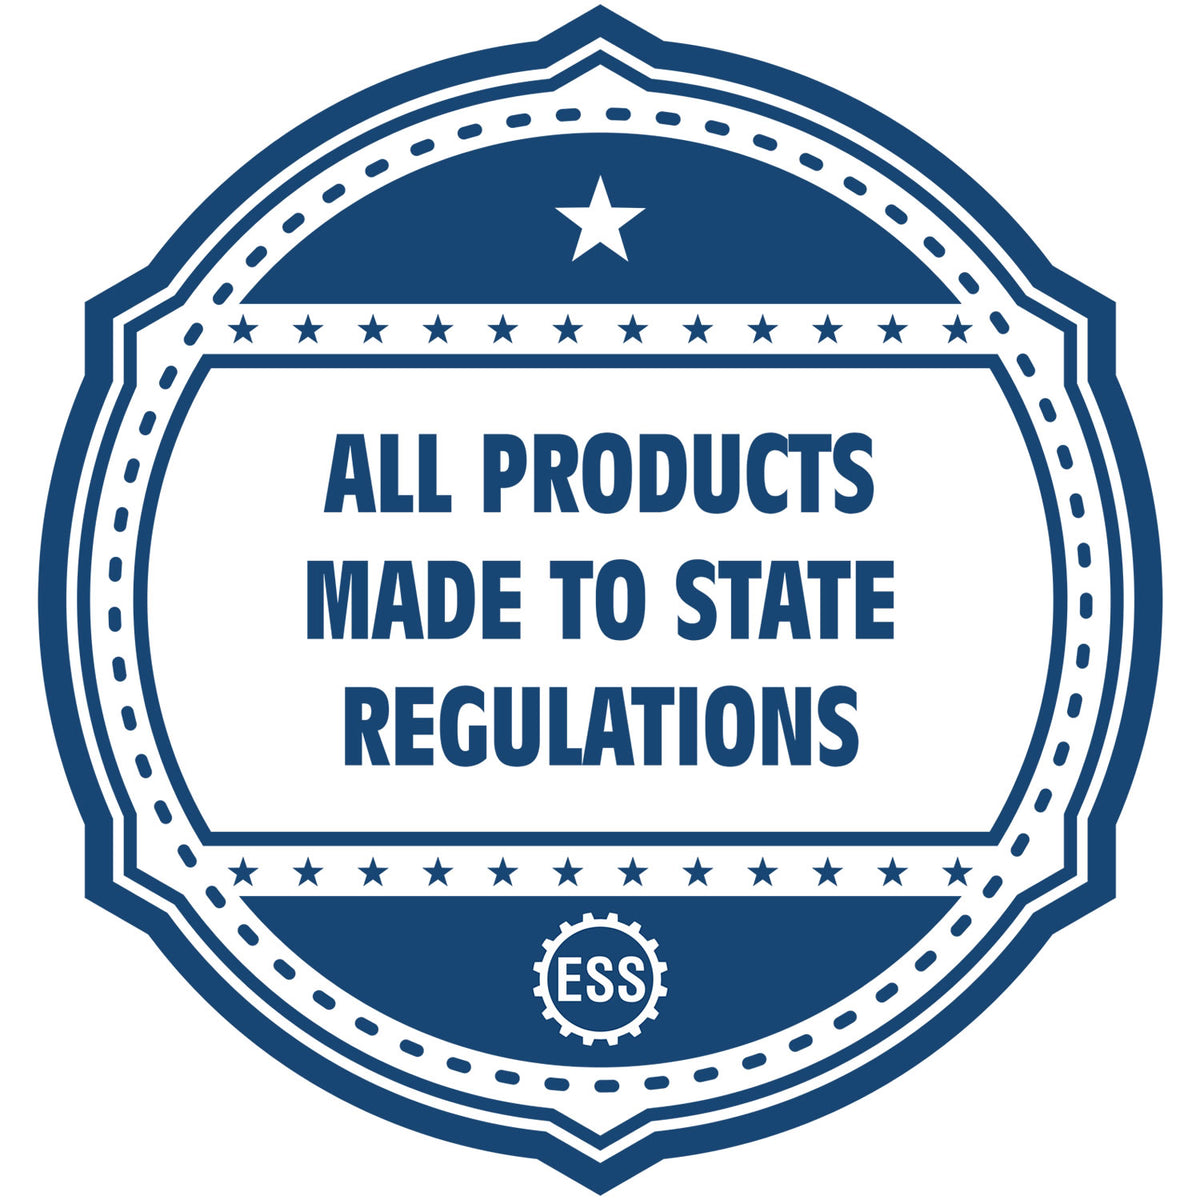 An icon or badge element for the Arkansas Landscape Architectural Seal Stamp showing that this product is made in compliance with state regulations.